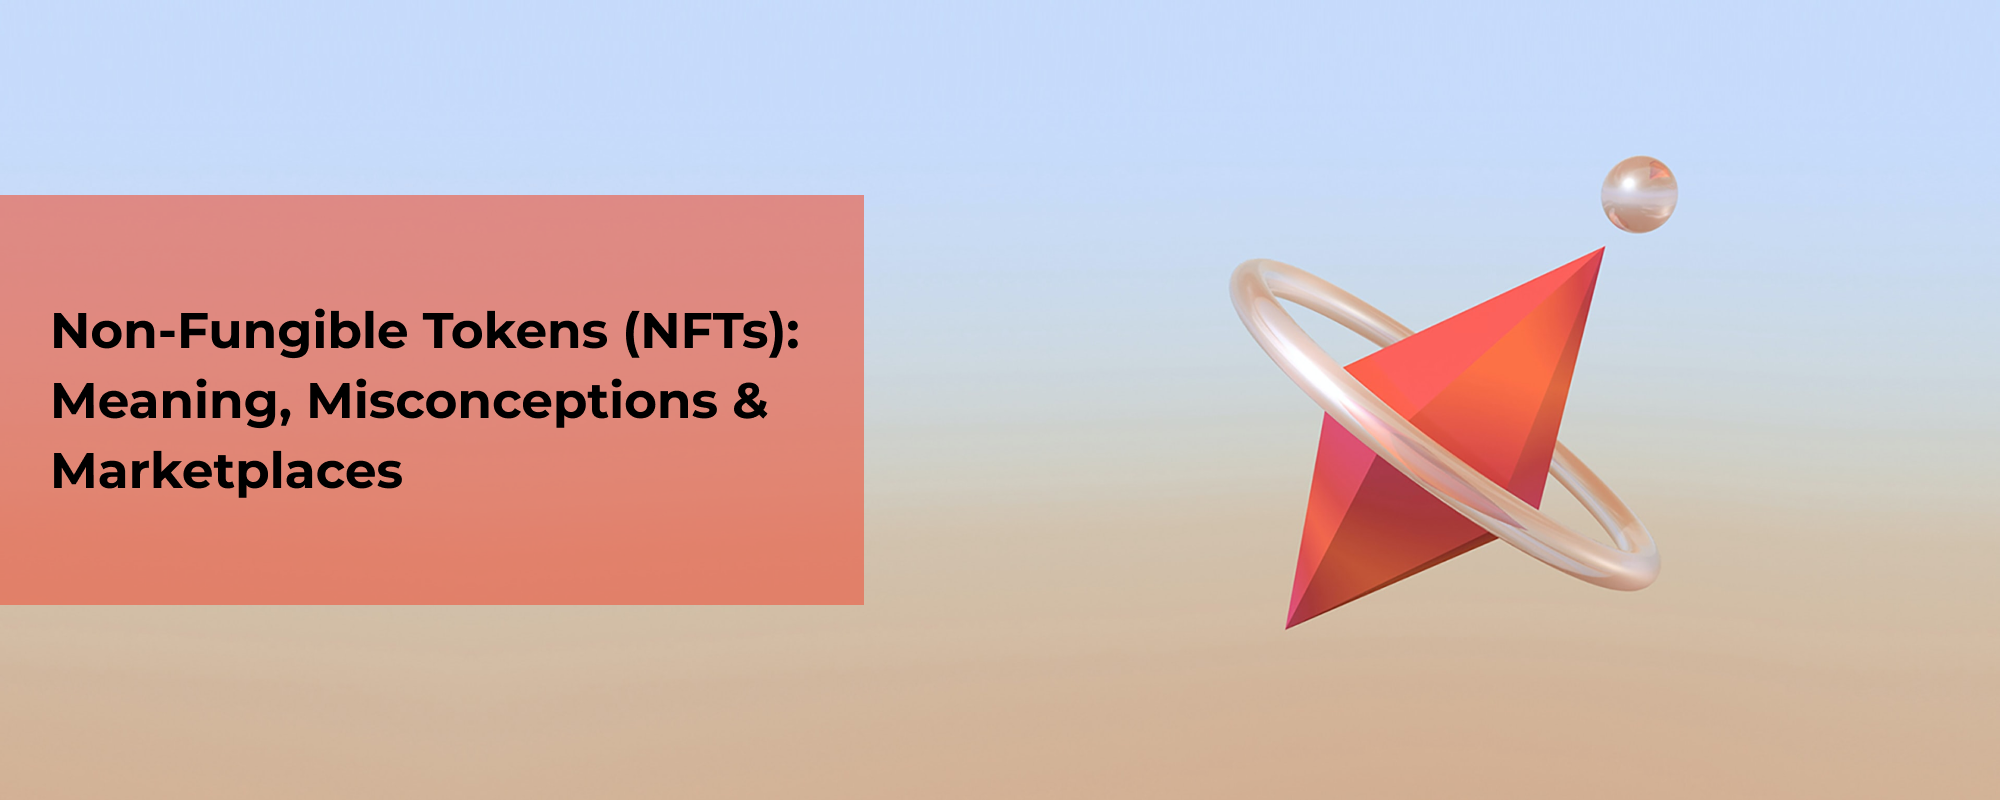 Non-Fungible Tokens (NFTs): Meaning, Misconceptions & Marketplaces